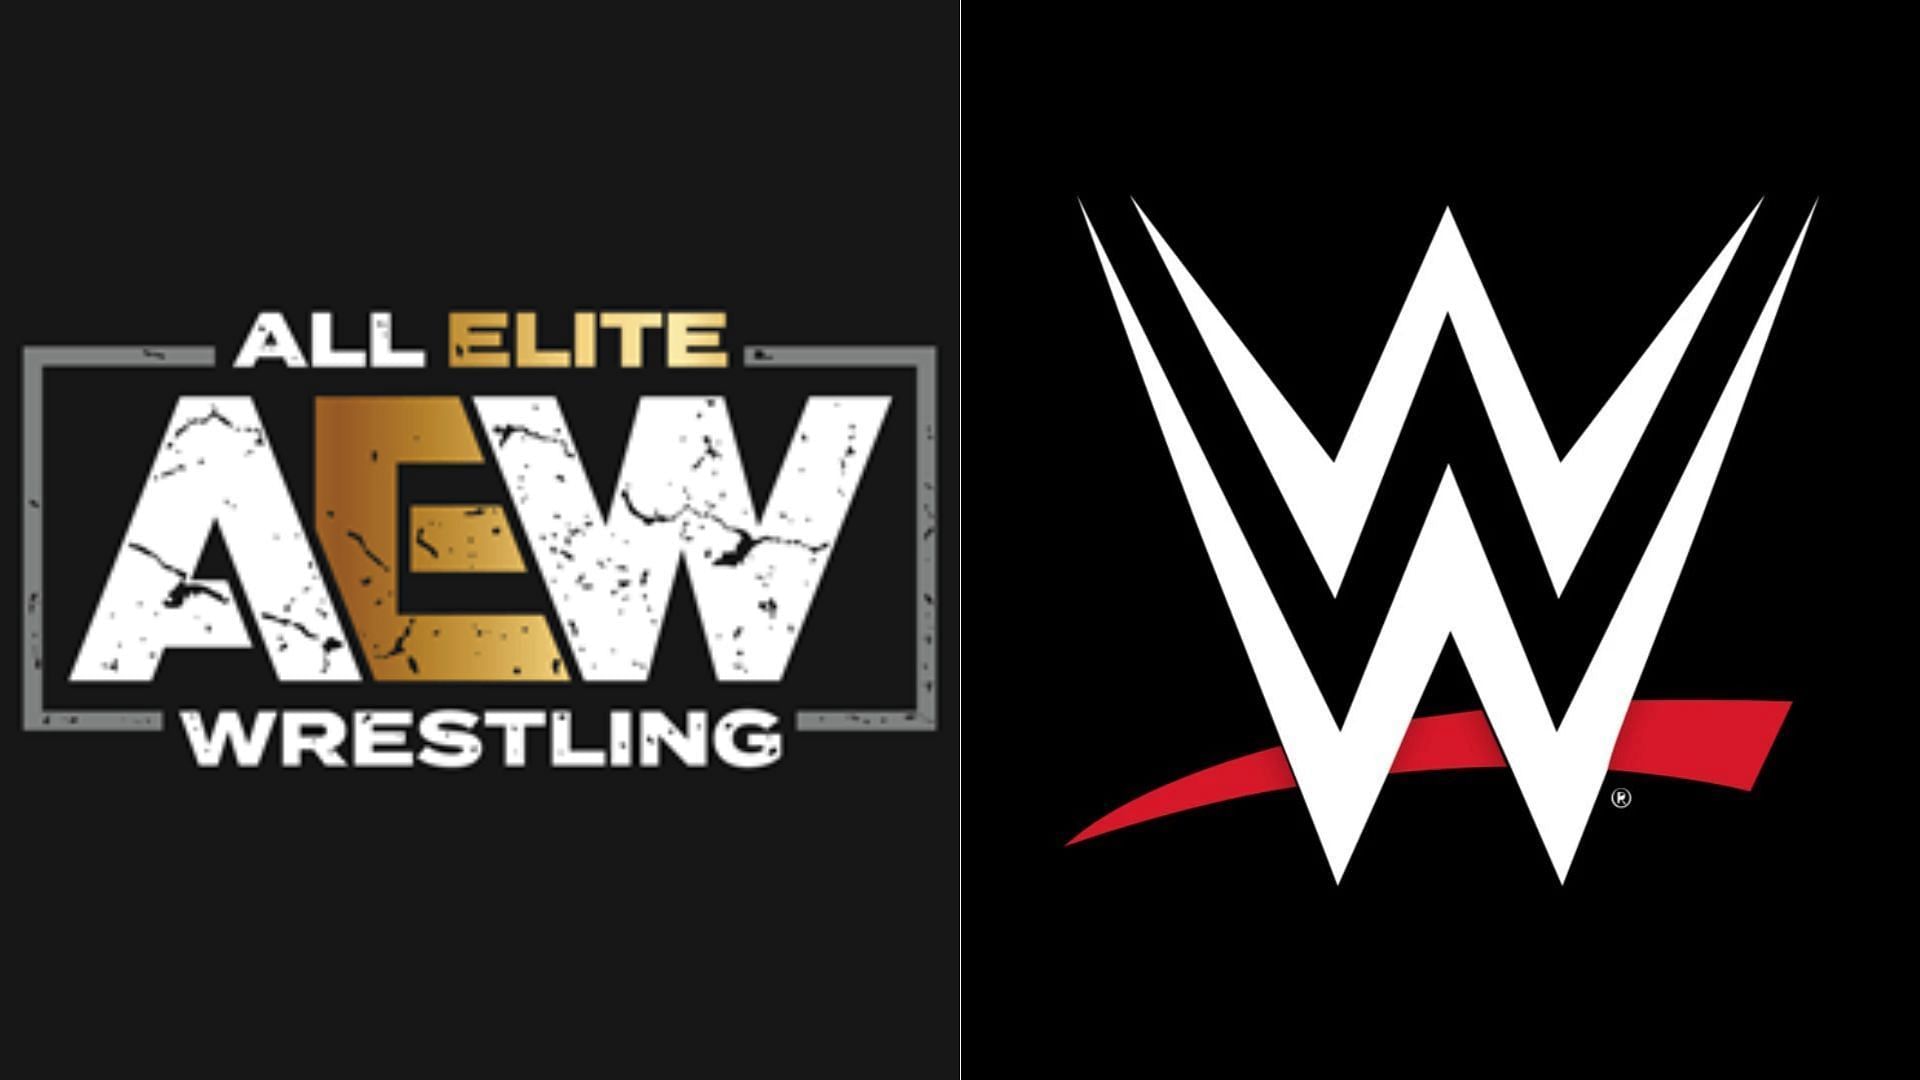 Many wrestlers have worked for both AEW and WWE